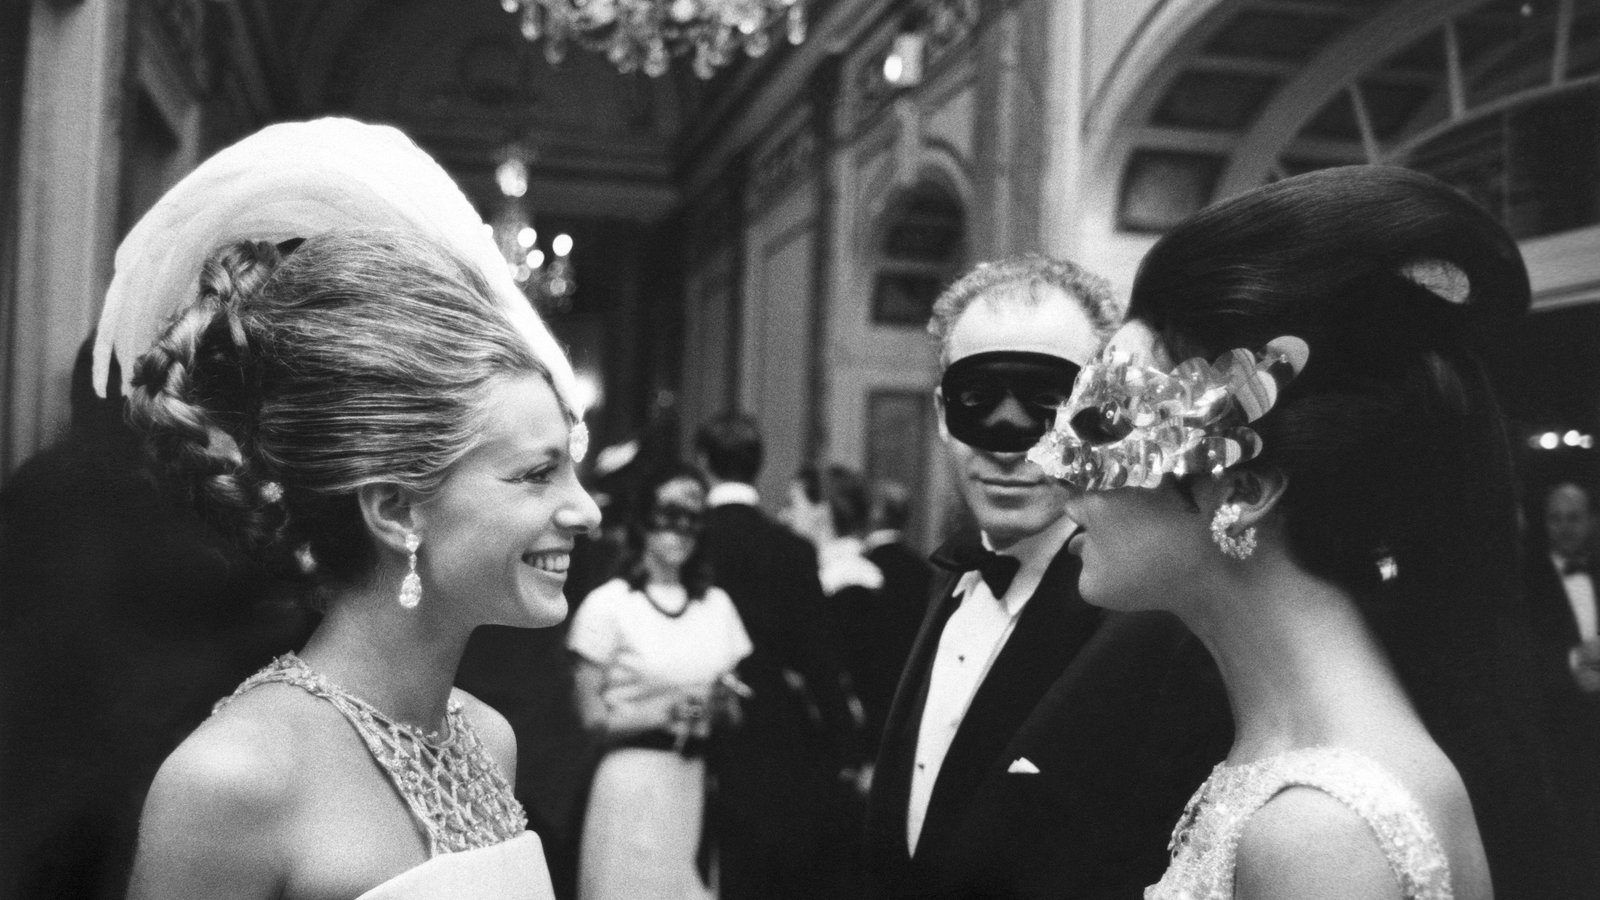 Party of the Century; Guests Wearing Masks at Party of the Century.